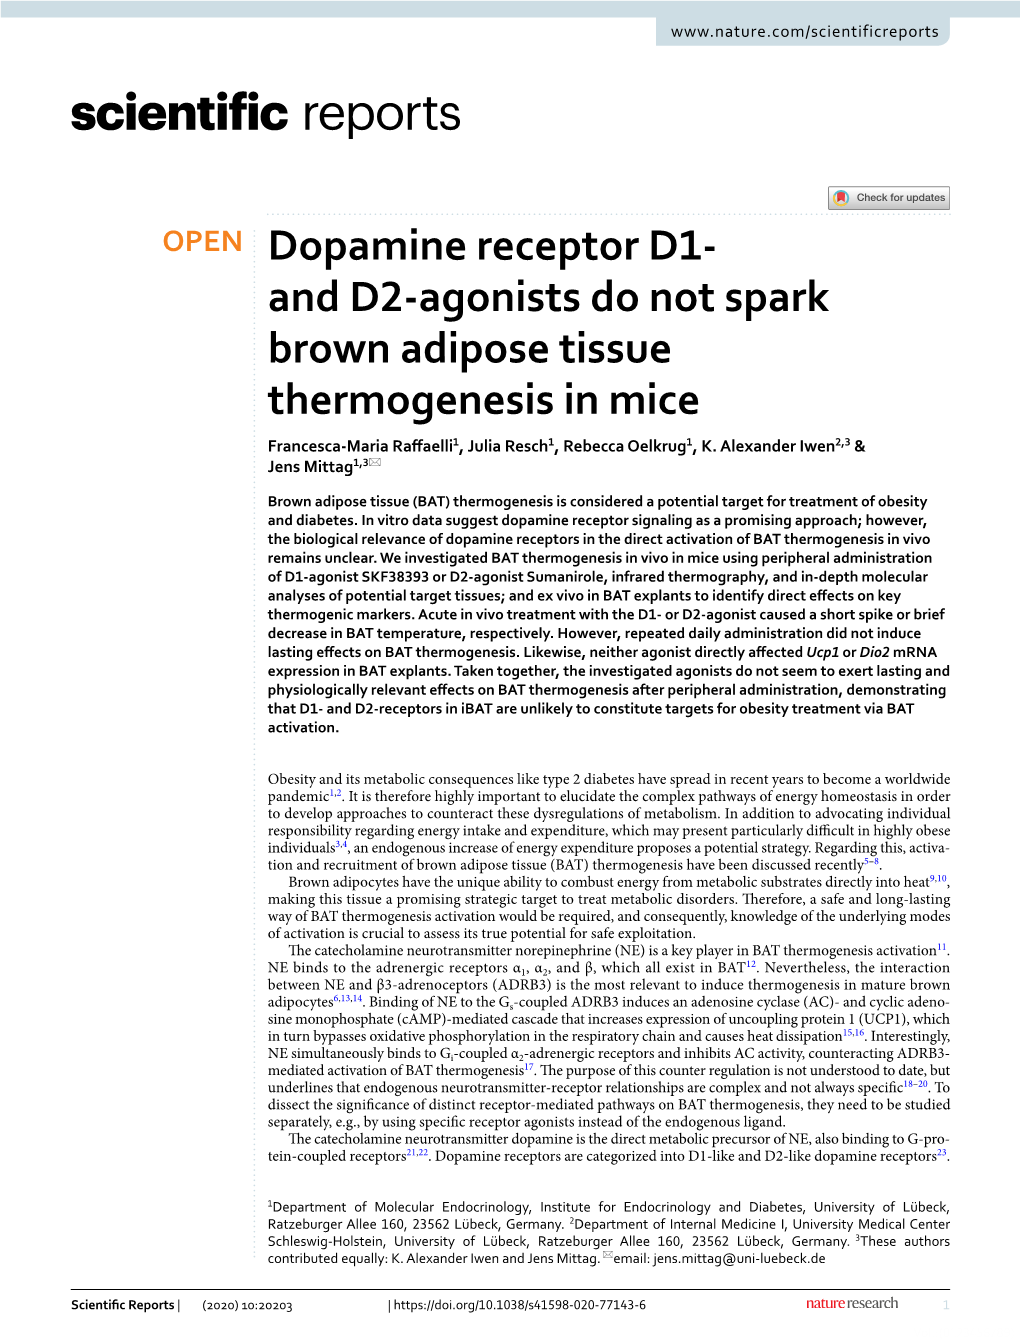 Dopamine Receptor D1‑ and D2‑Agonists Do Not Spark Brown Adipose Tissue Thermogenesis in Mice Francesca‑Maria Rafaelli1, Julia Resch1, Rebecca Oelkrug1, K